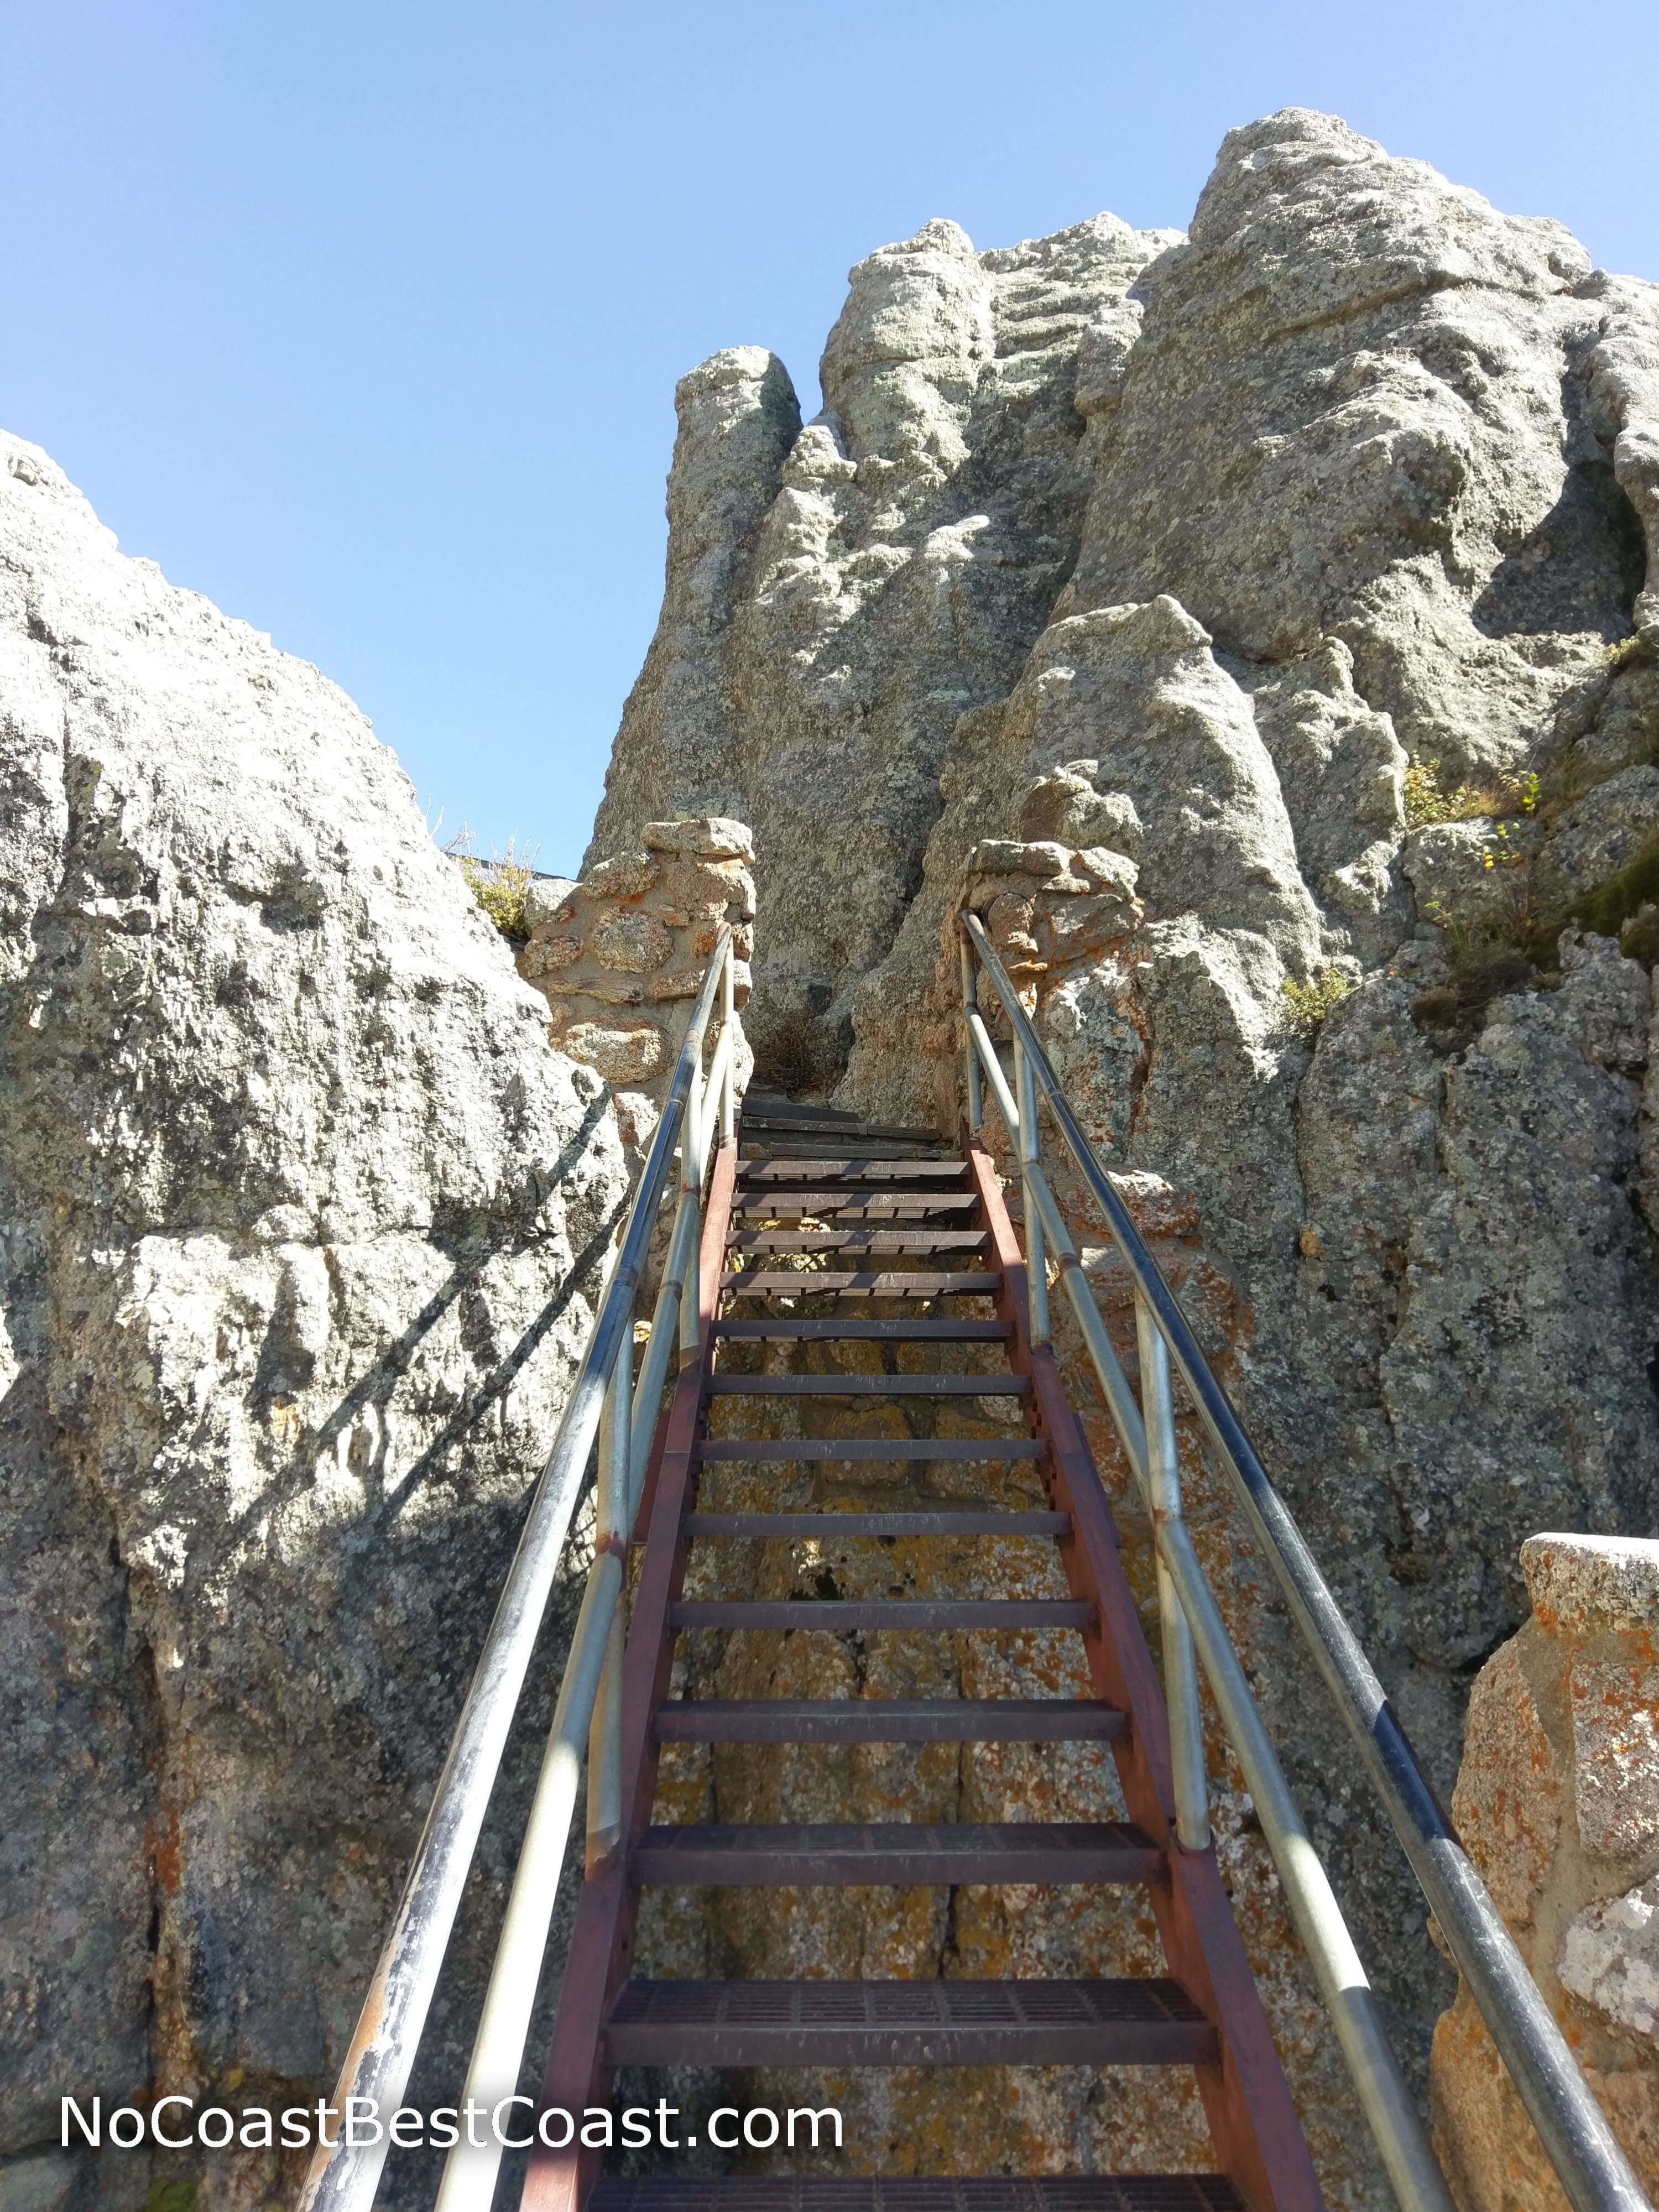 The last section involves climbing several staircases